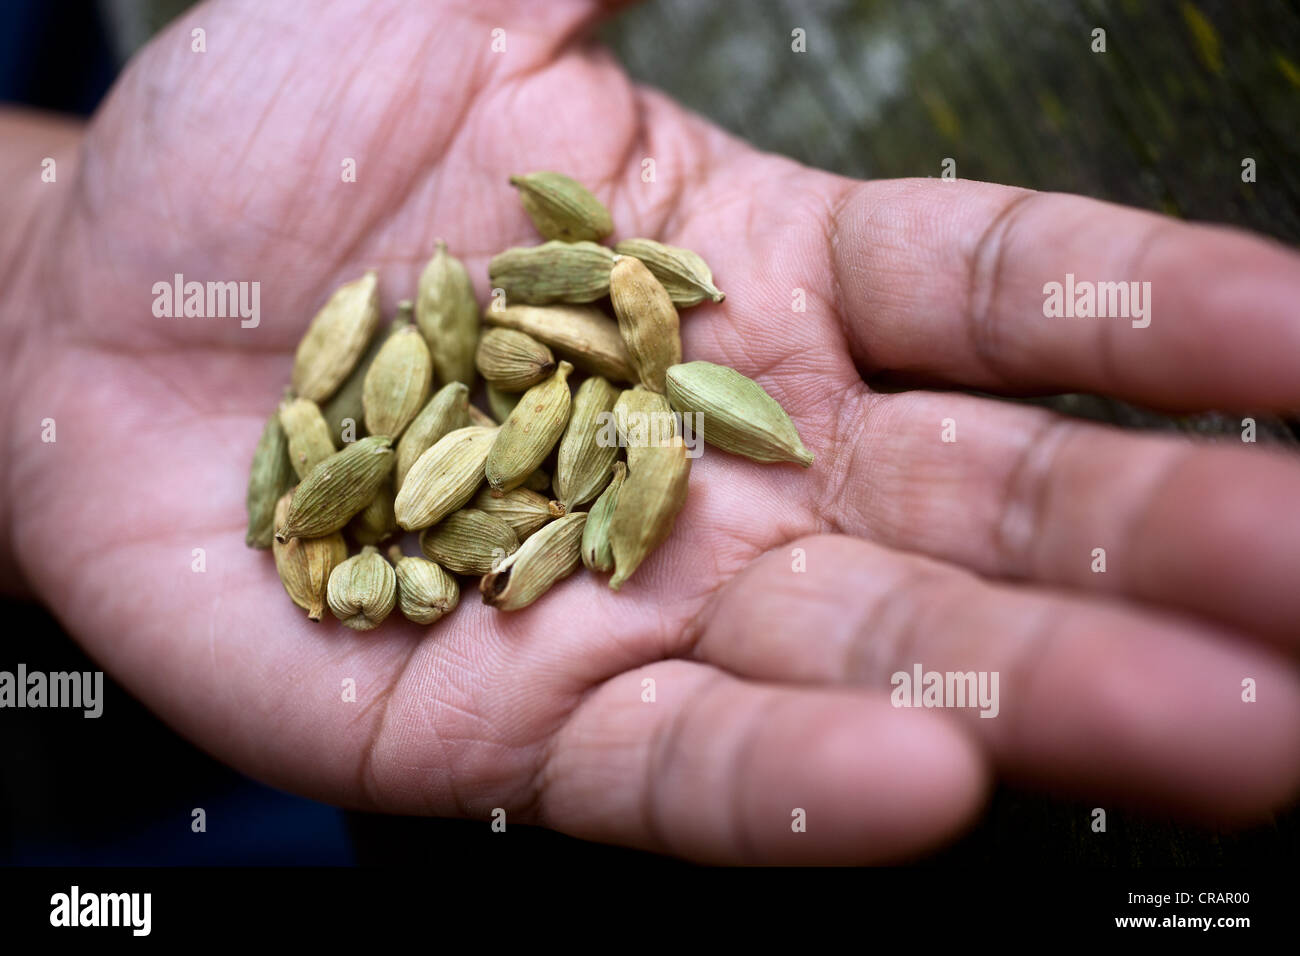 Dried cardamom seed pods (Elettaria cardamomum) held in a hand Stock Photo